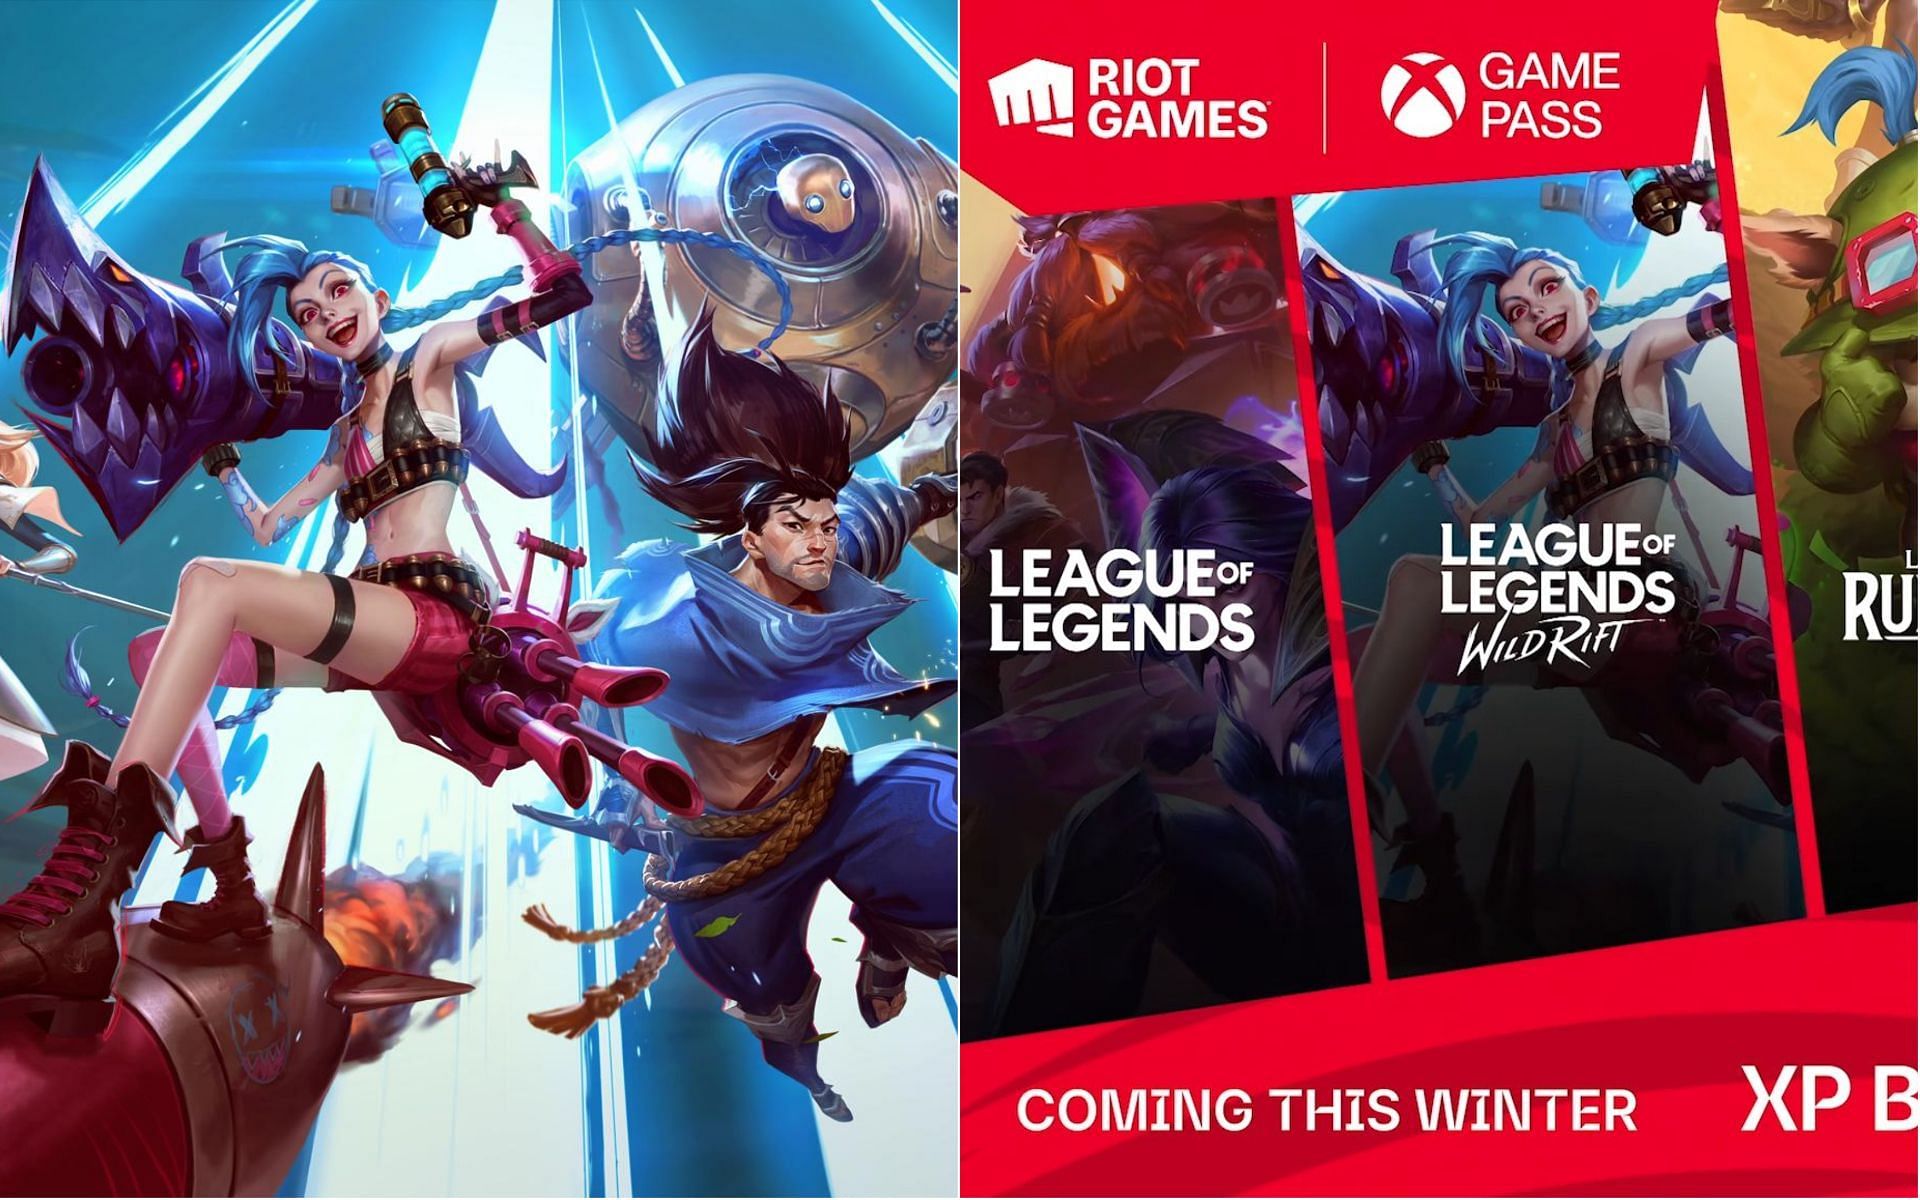 League of Legends and Wild Rift will arrive on Xbox Game Pass this winter (Image via Riot Games)